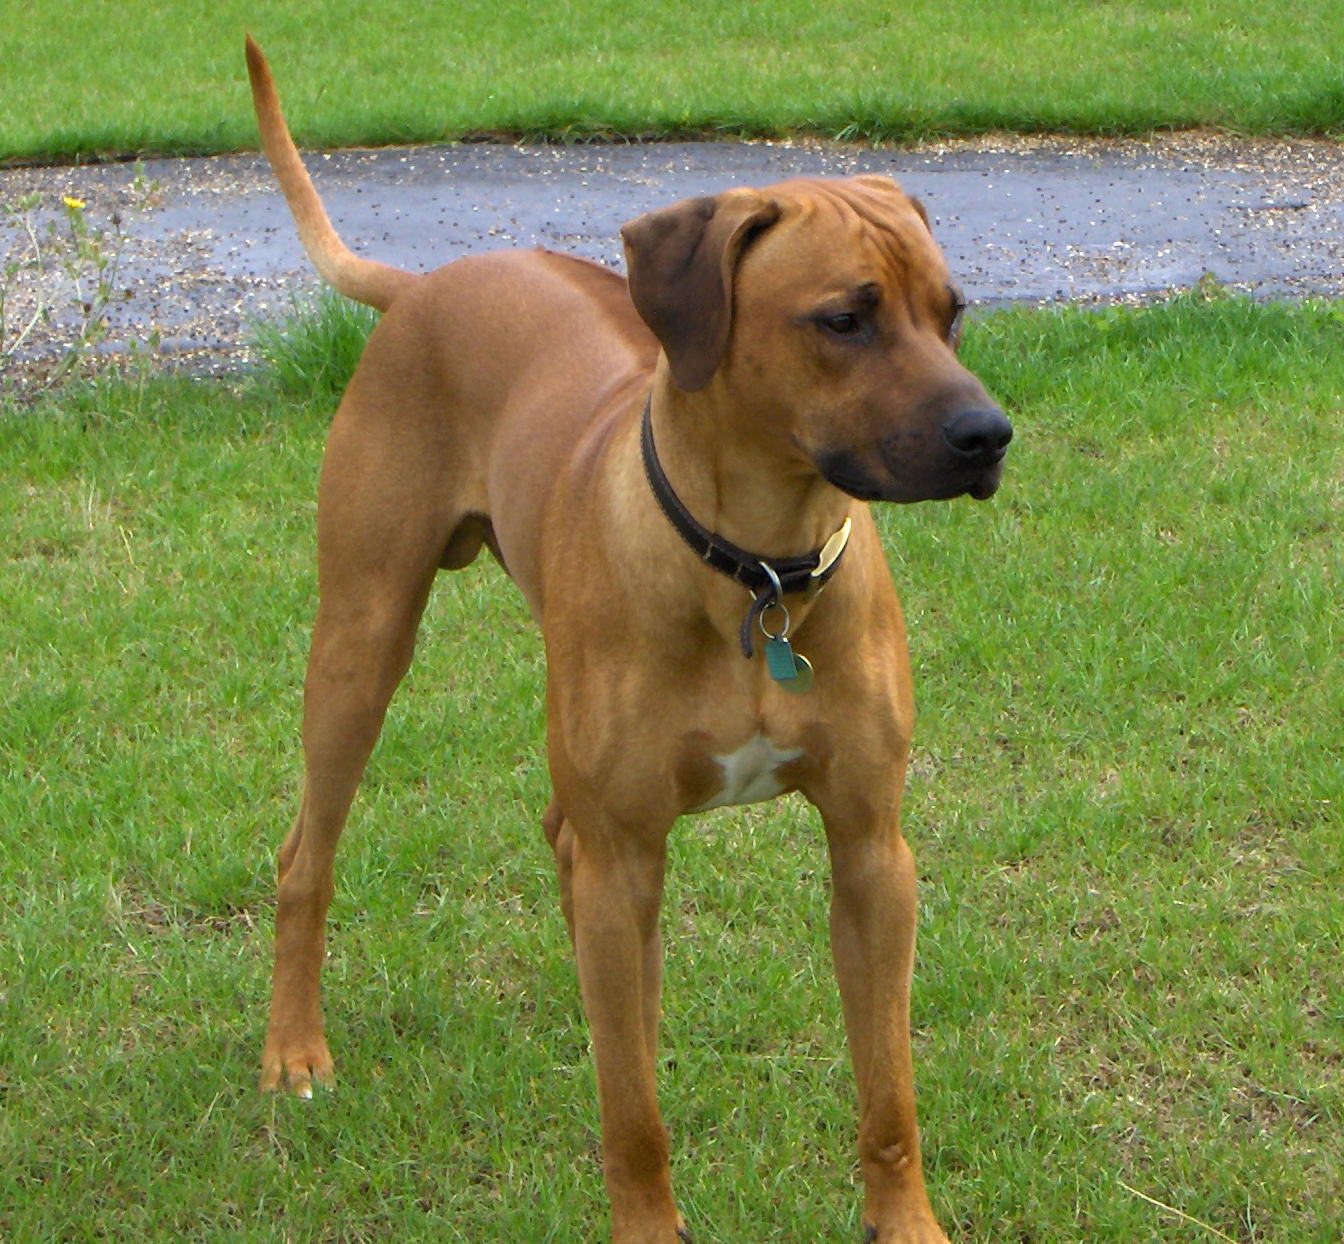 Rhodesian Ridgeback Dog On The Grass Photo And Wallpaper Beautiful Rhodesian Ridgeback Dog On The Grass Pictures